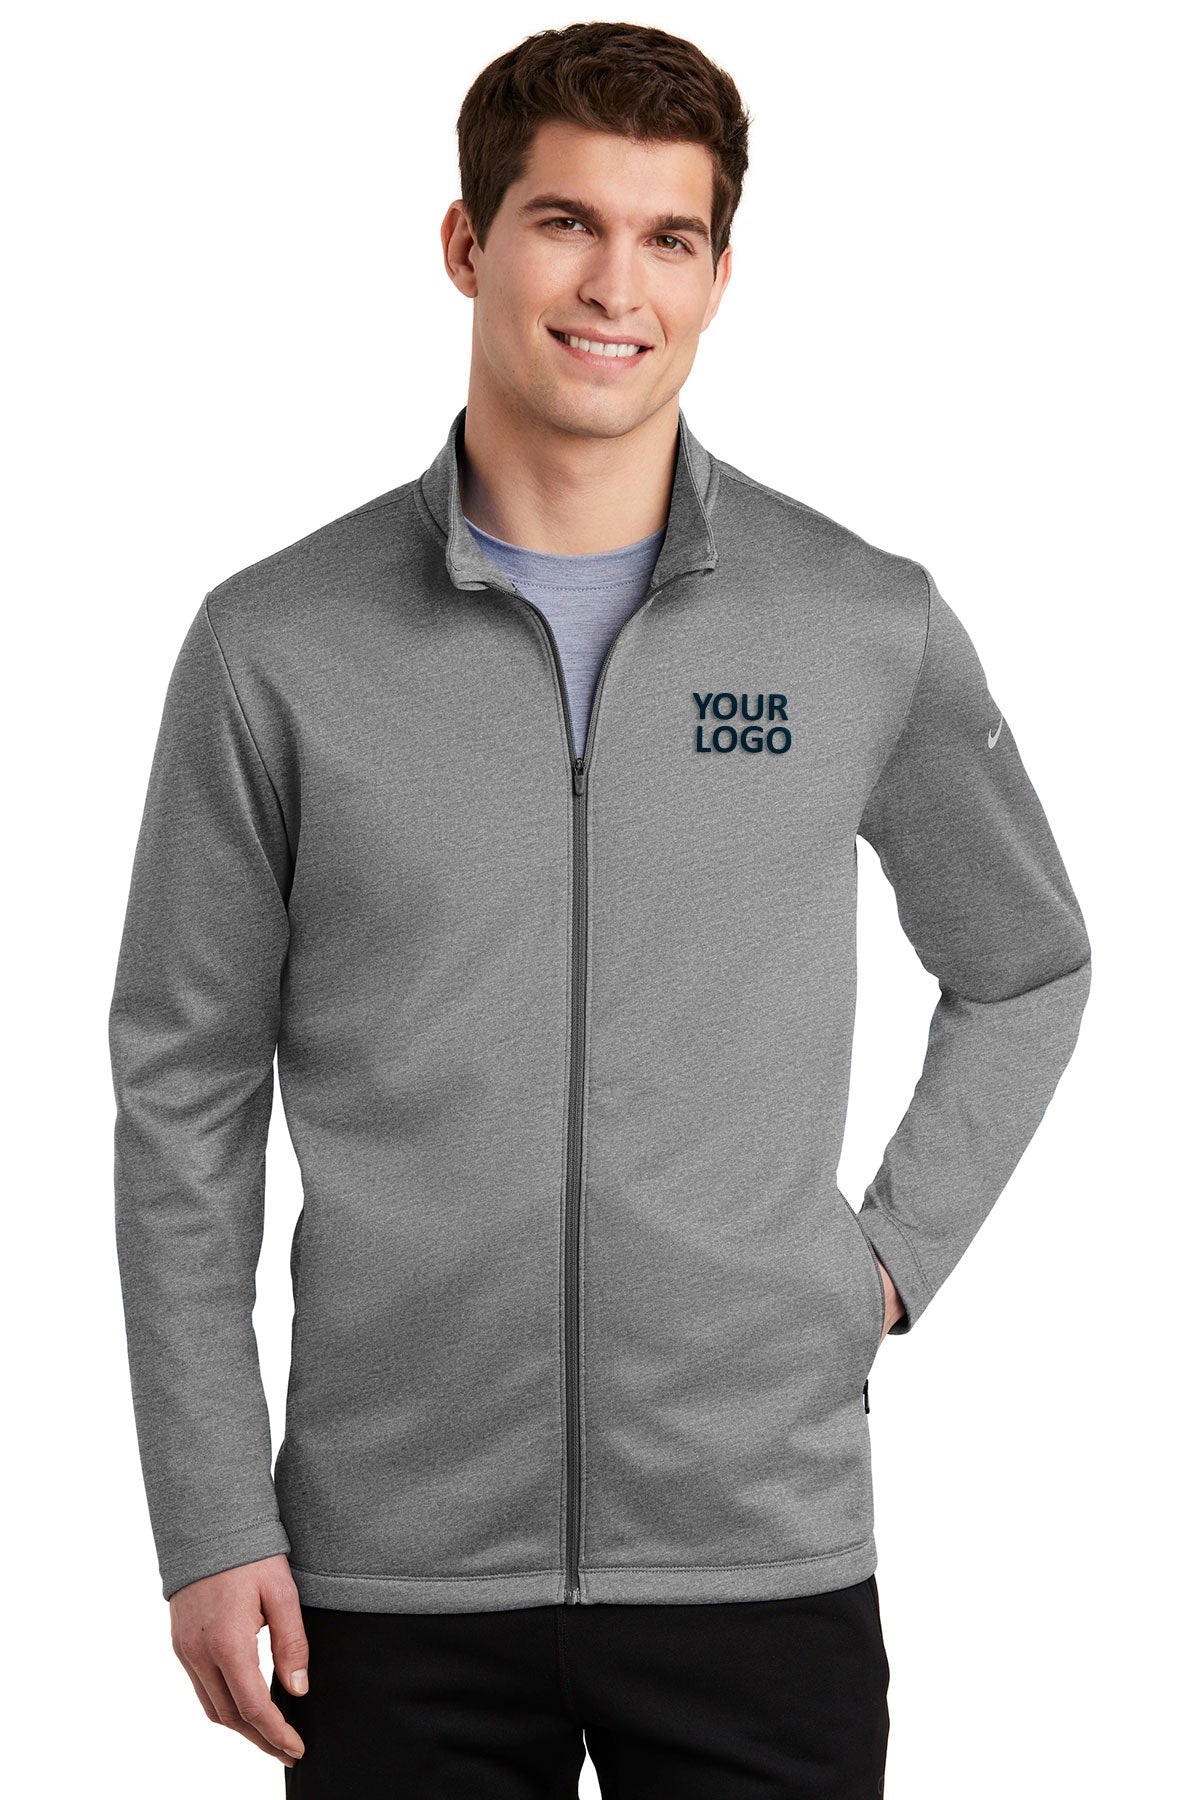 Nike Dark Grey Heather NKAH6418 embroidered jackets for business